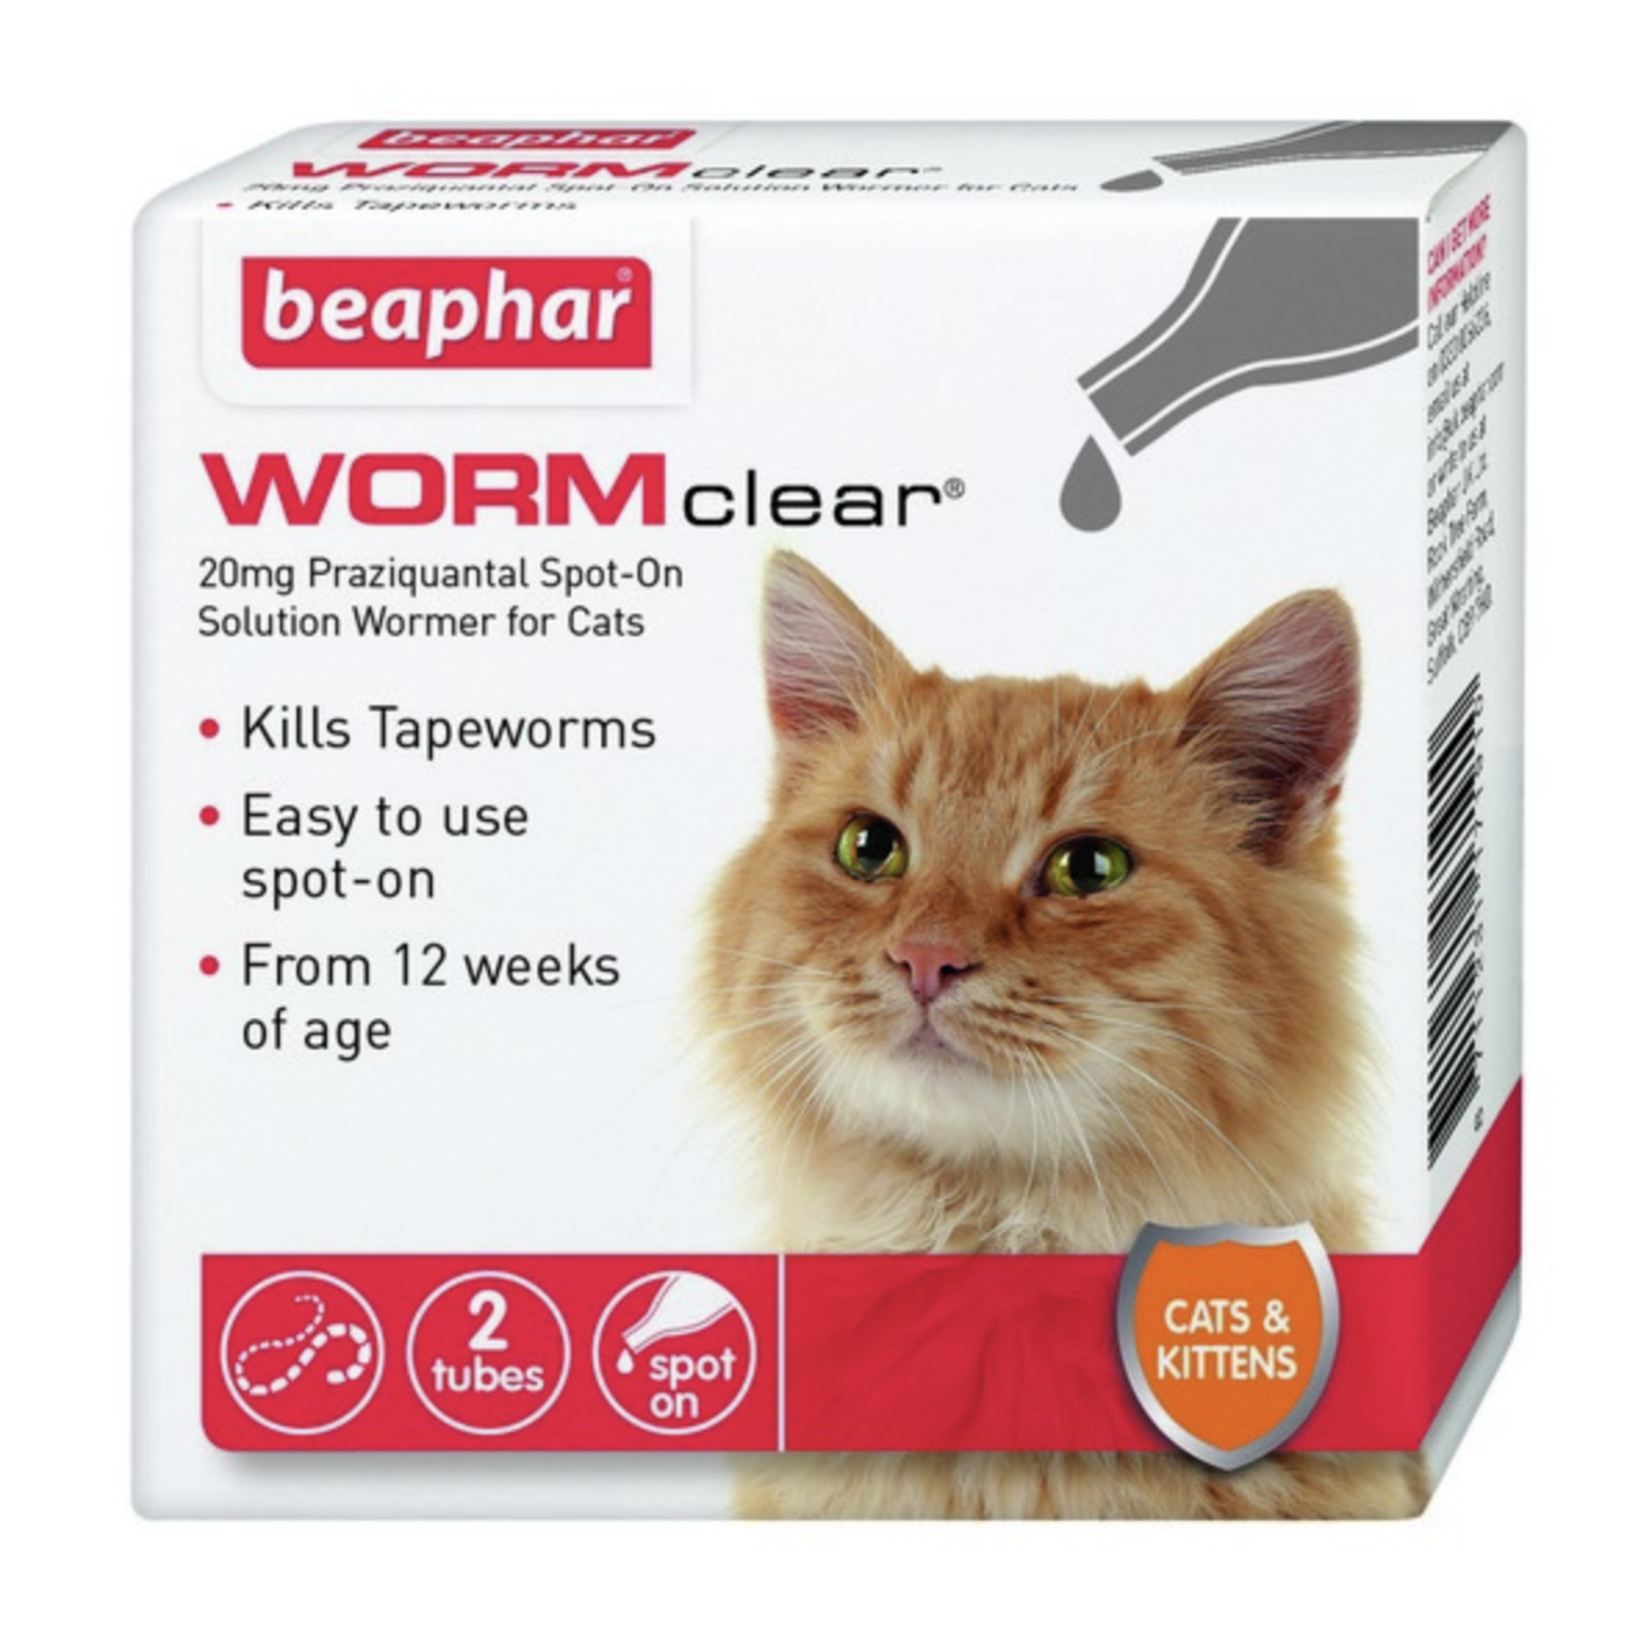 Beaphar WORMclear Cat Spot-On Wormer for Cats, 2 pipettes